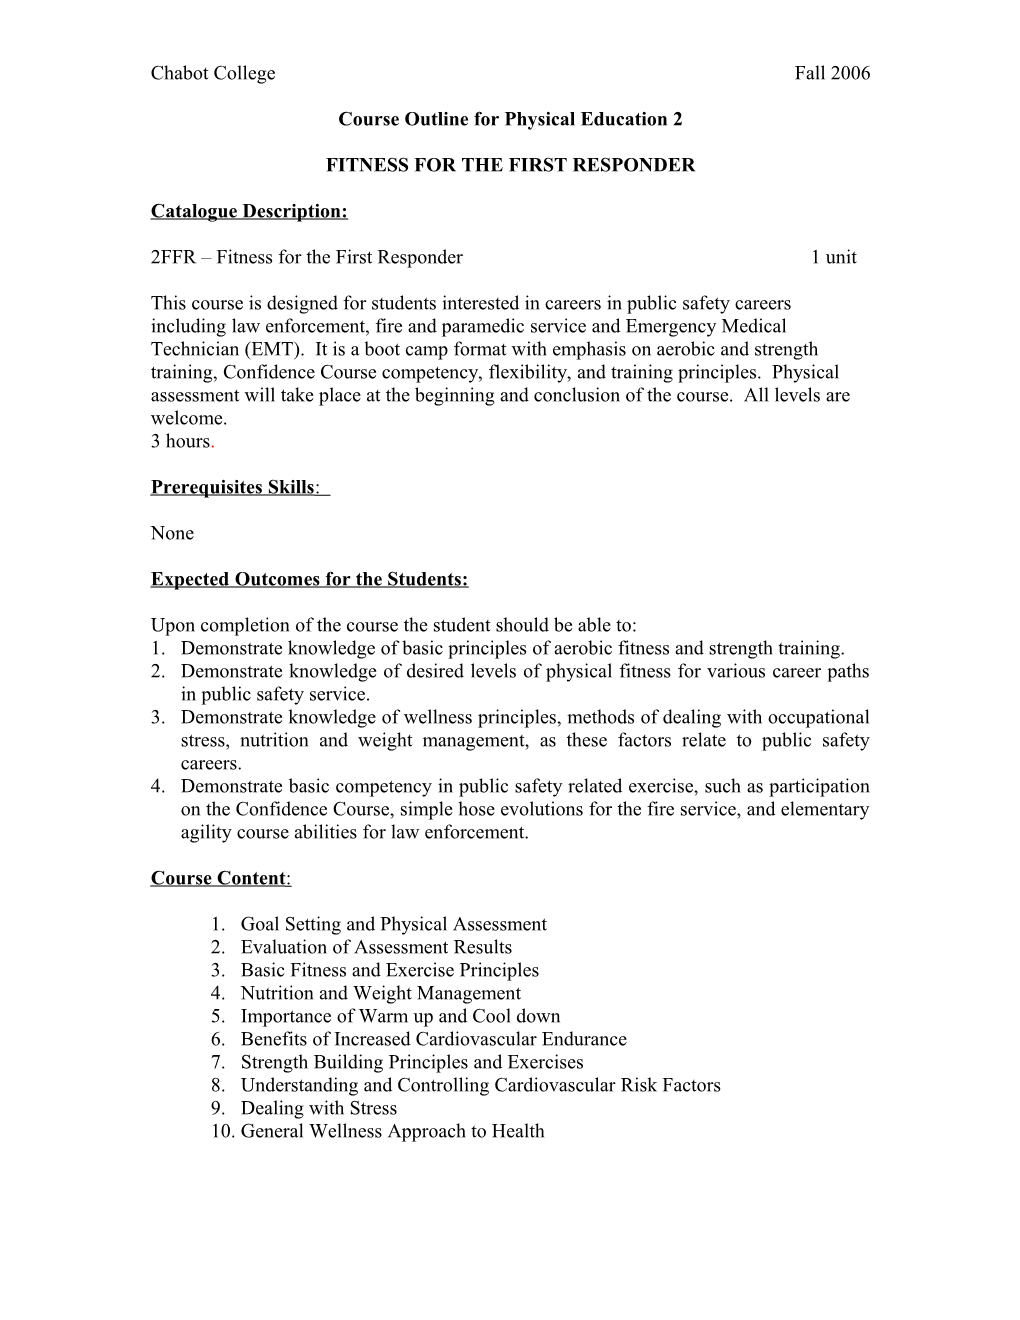 Course Outline For Physical Education 2 – FITNESS BOOT CAMP